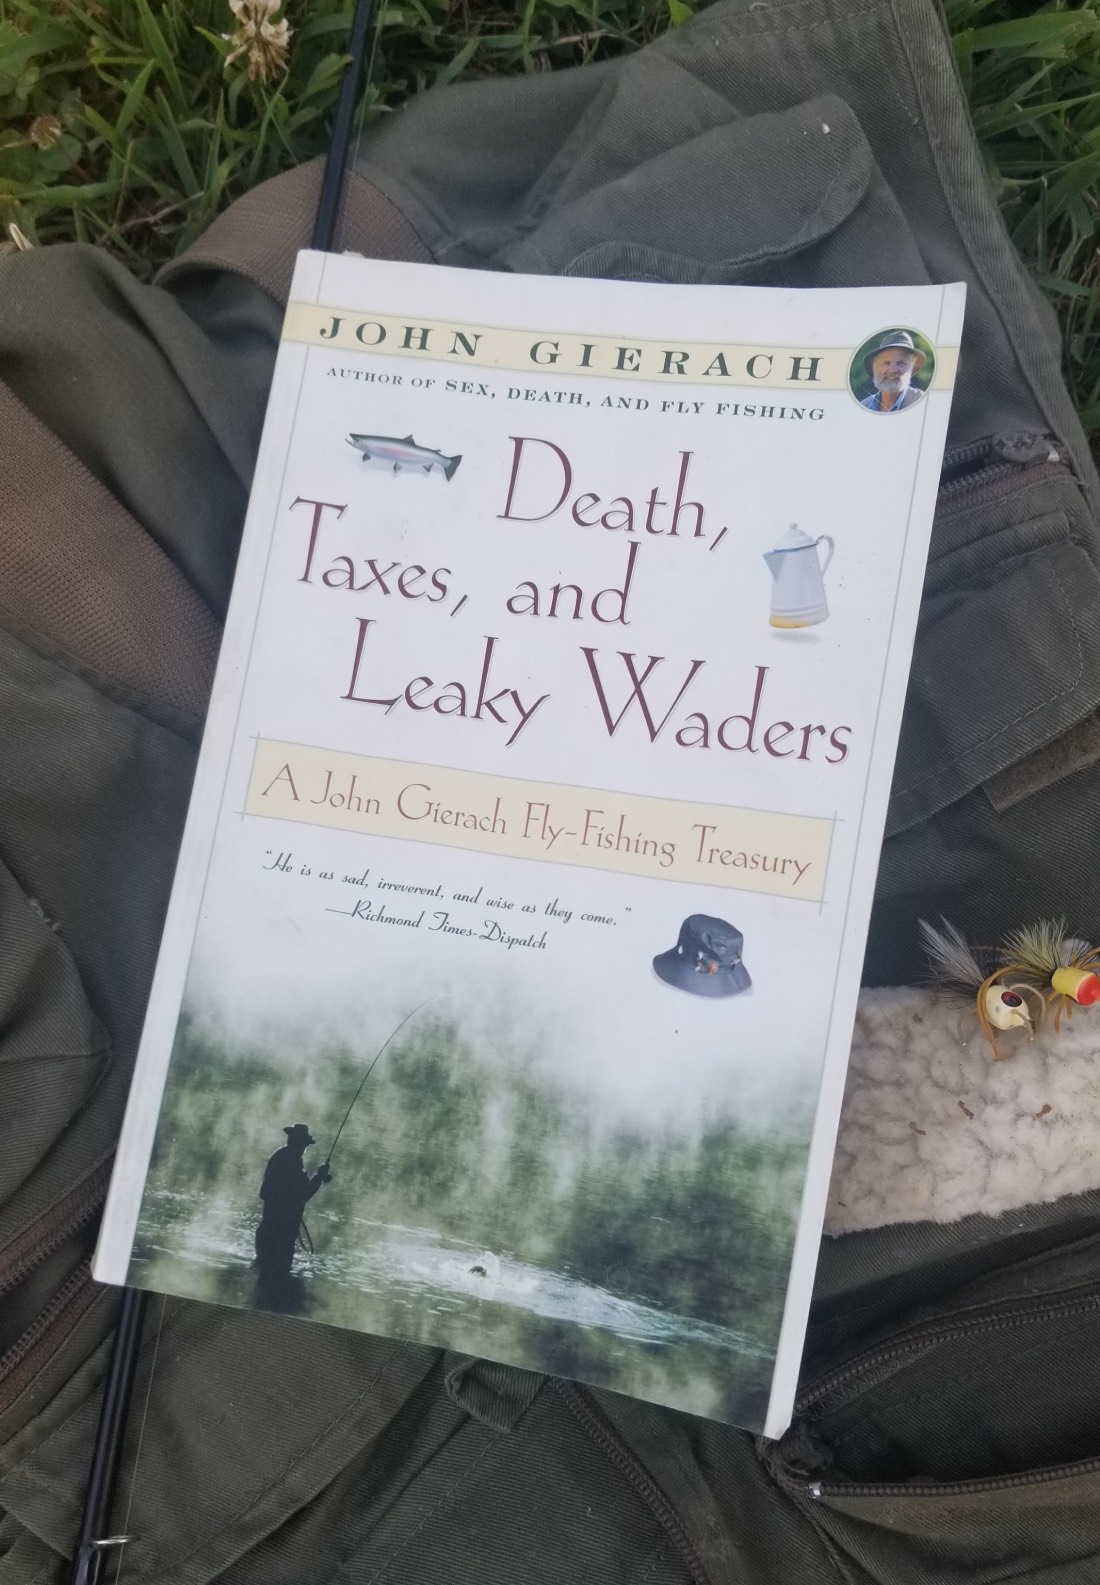 book cover next to some fly fishing flies